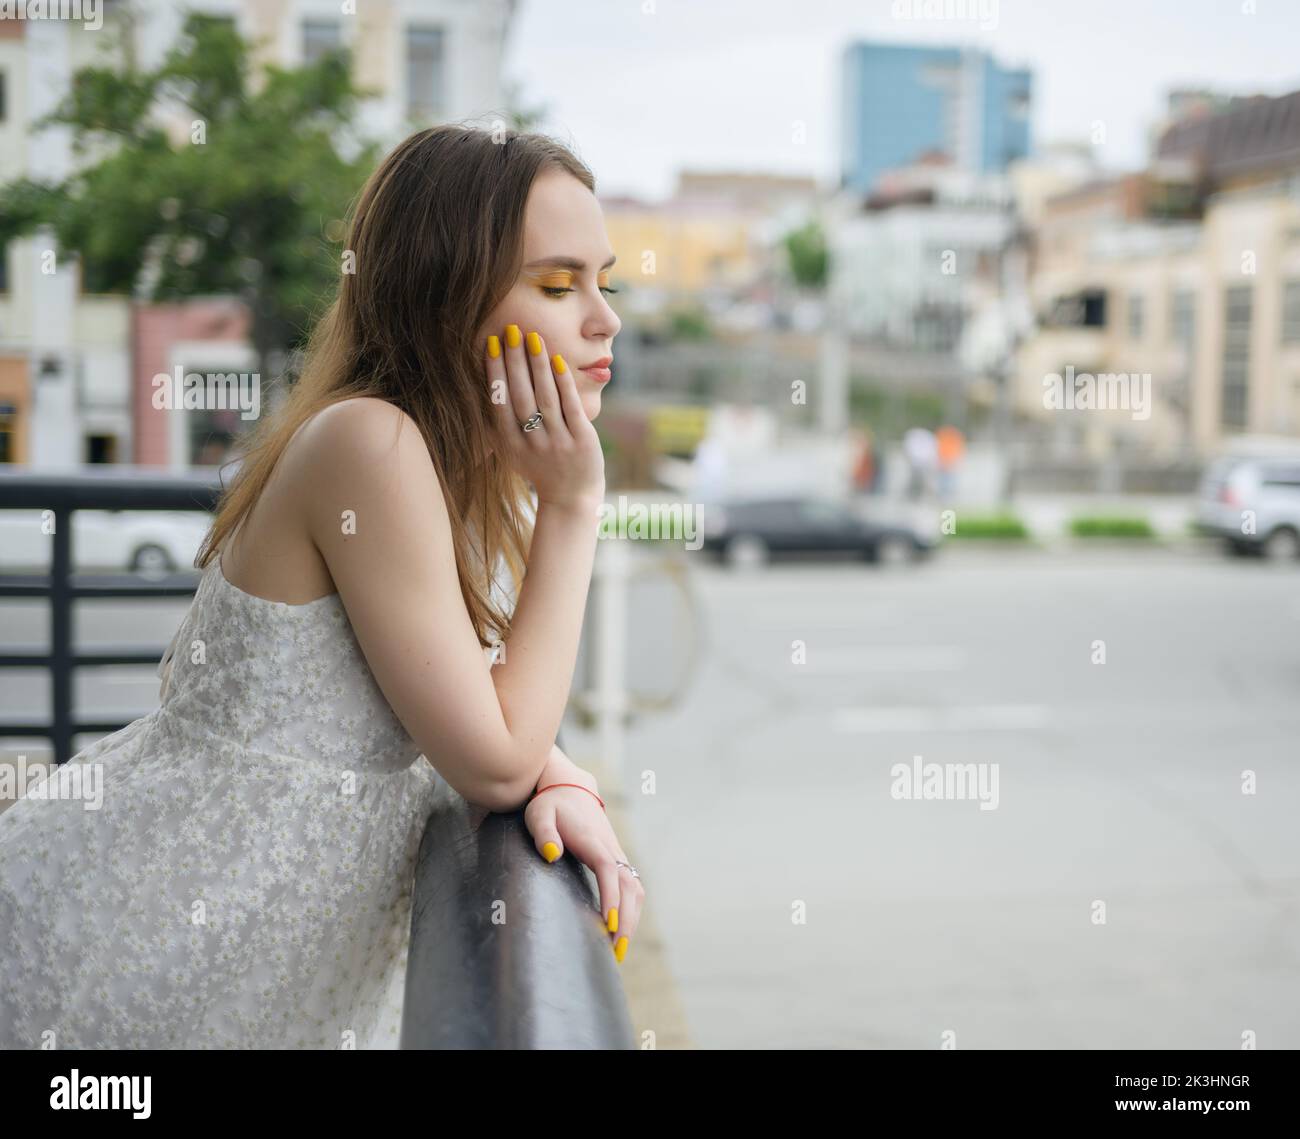 City portrait of beautiful young woman in white dress. Stock Photo